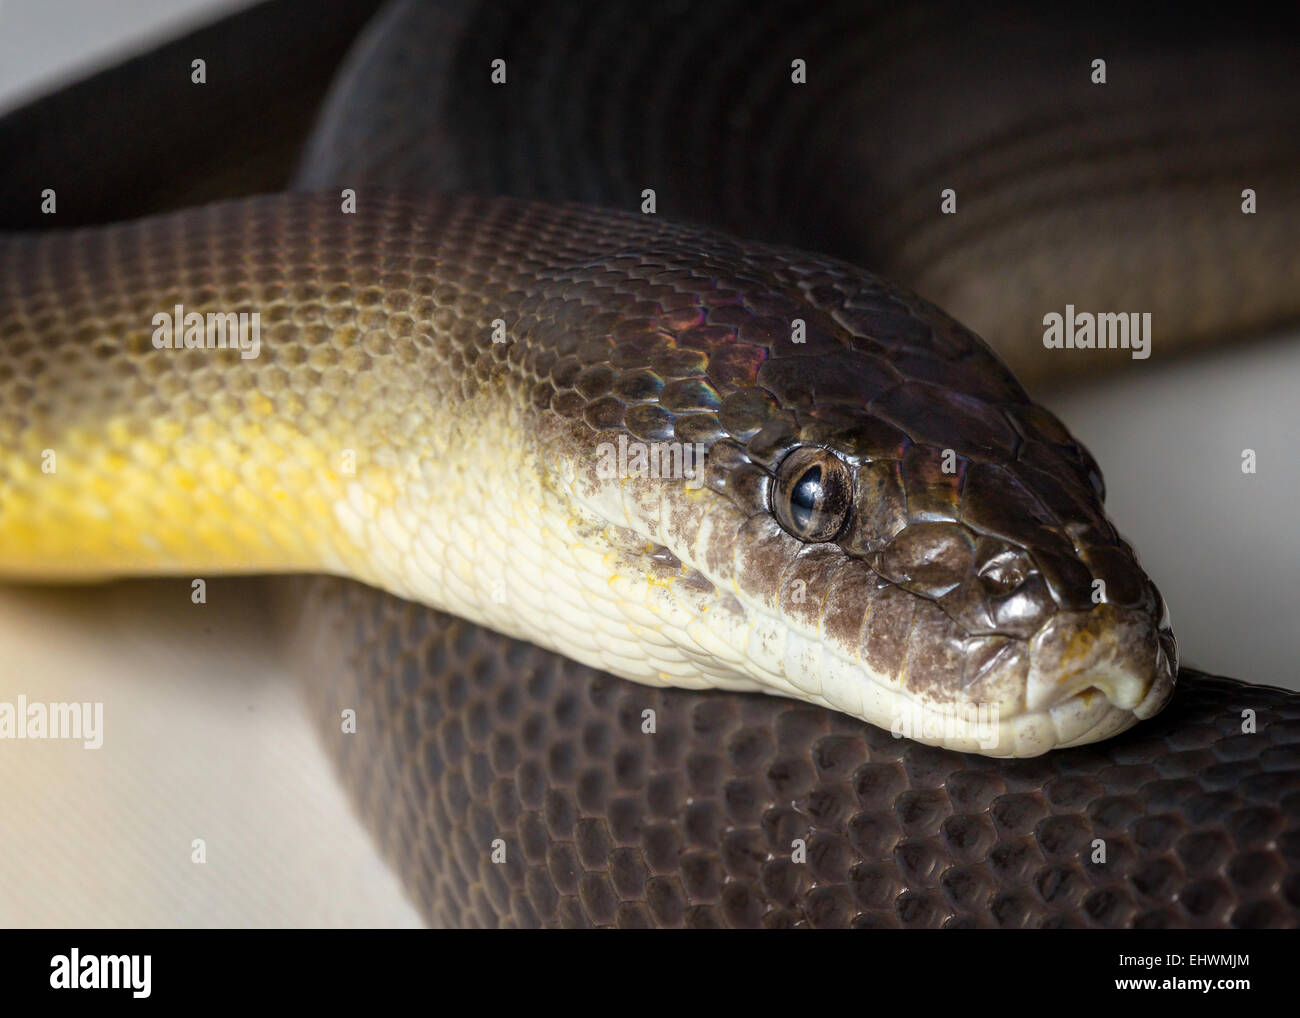 a close up of a water python Stock Photo